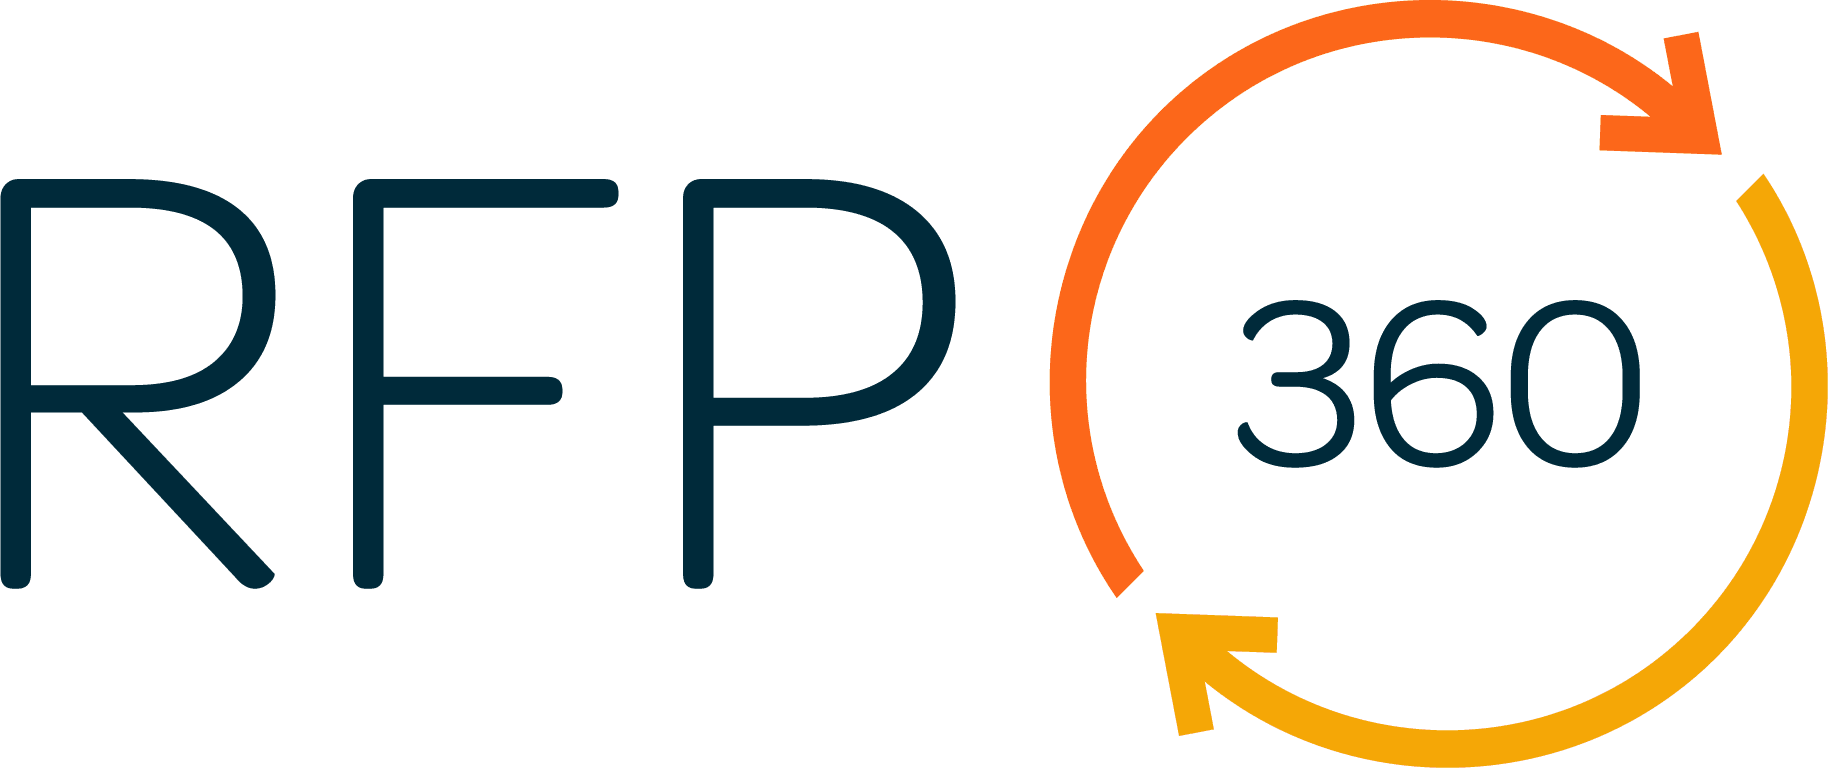 RFP360 offers knowle